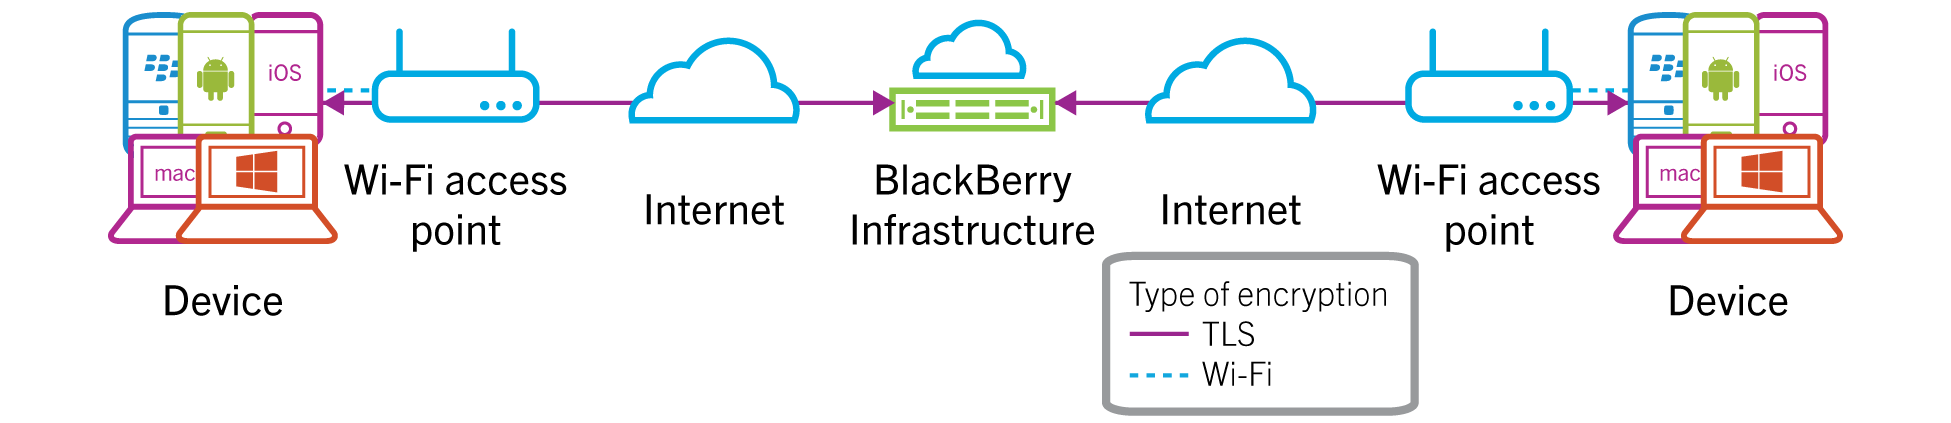 Architectural diagram showing how BBM Enterprise                        voice or video protects messages between a device on a Wi-Fi network and a device on a Wi-Fi network during call setup